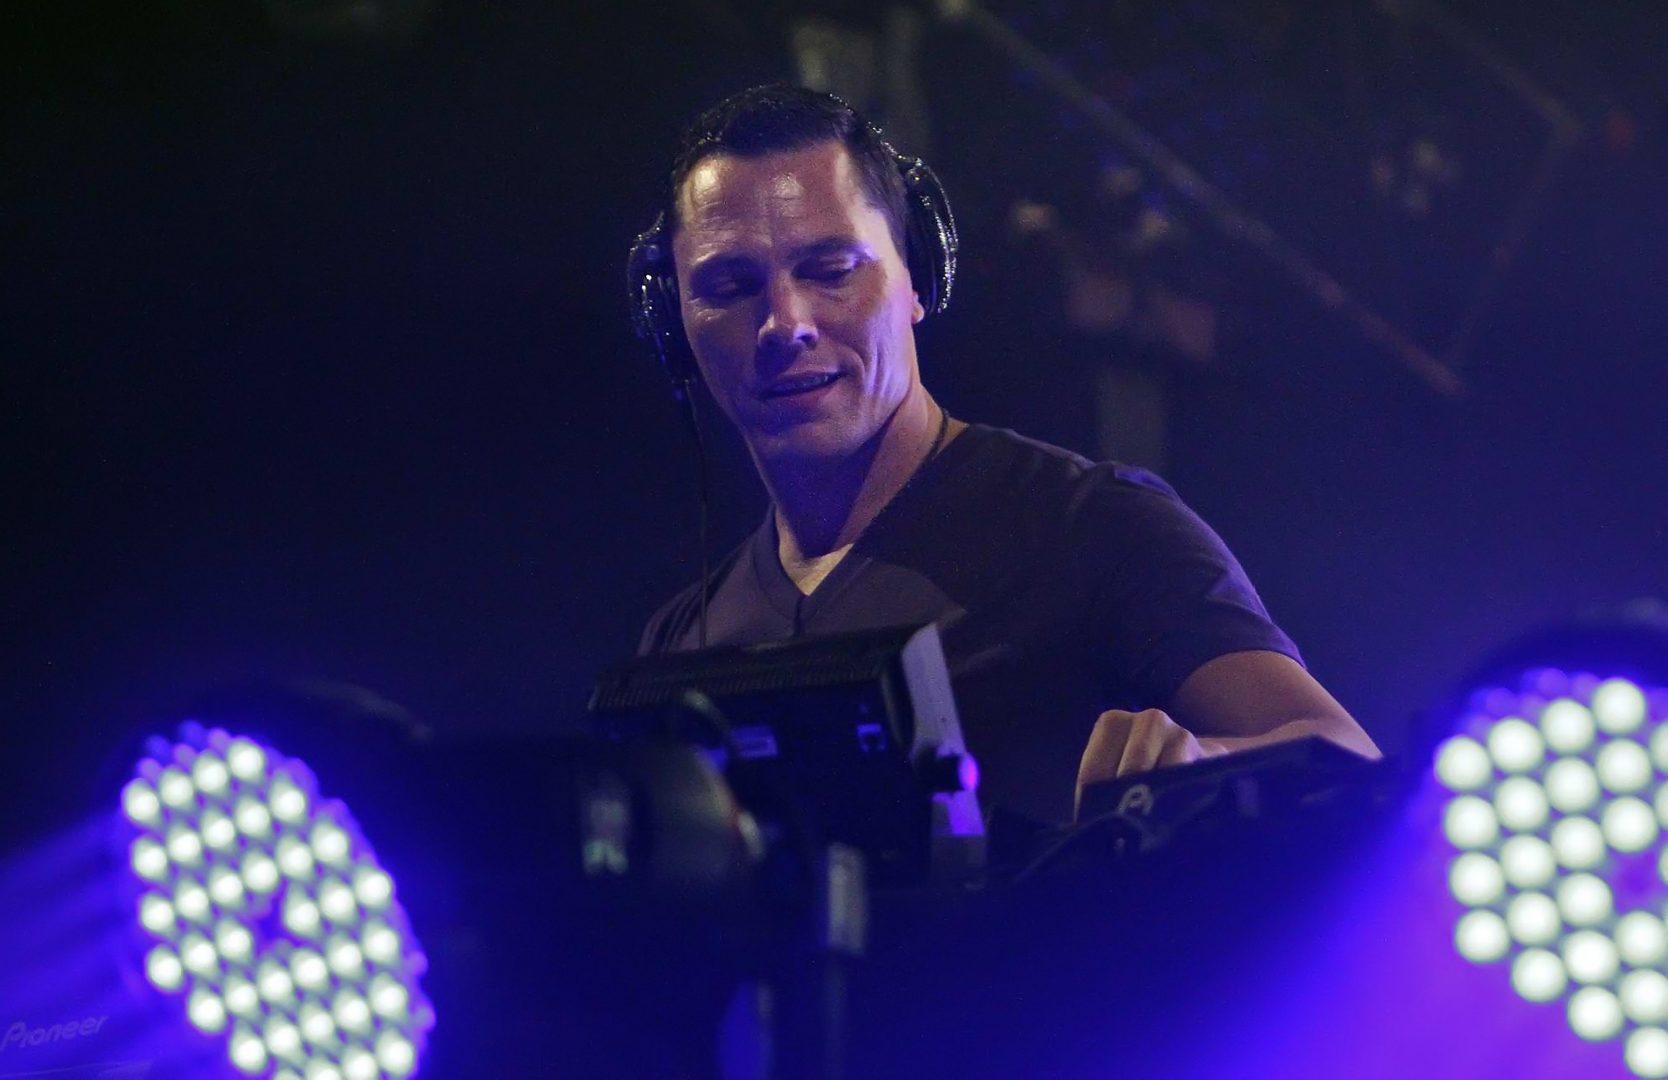 Lawerence K. Ho / Los Angeles Times / MCT
DJ Tiesto performs at the San Diego Sports Arena in October 2011.